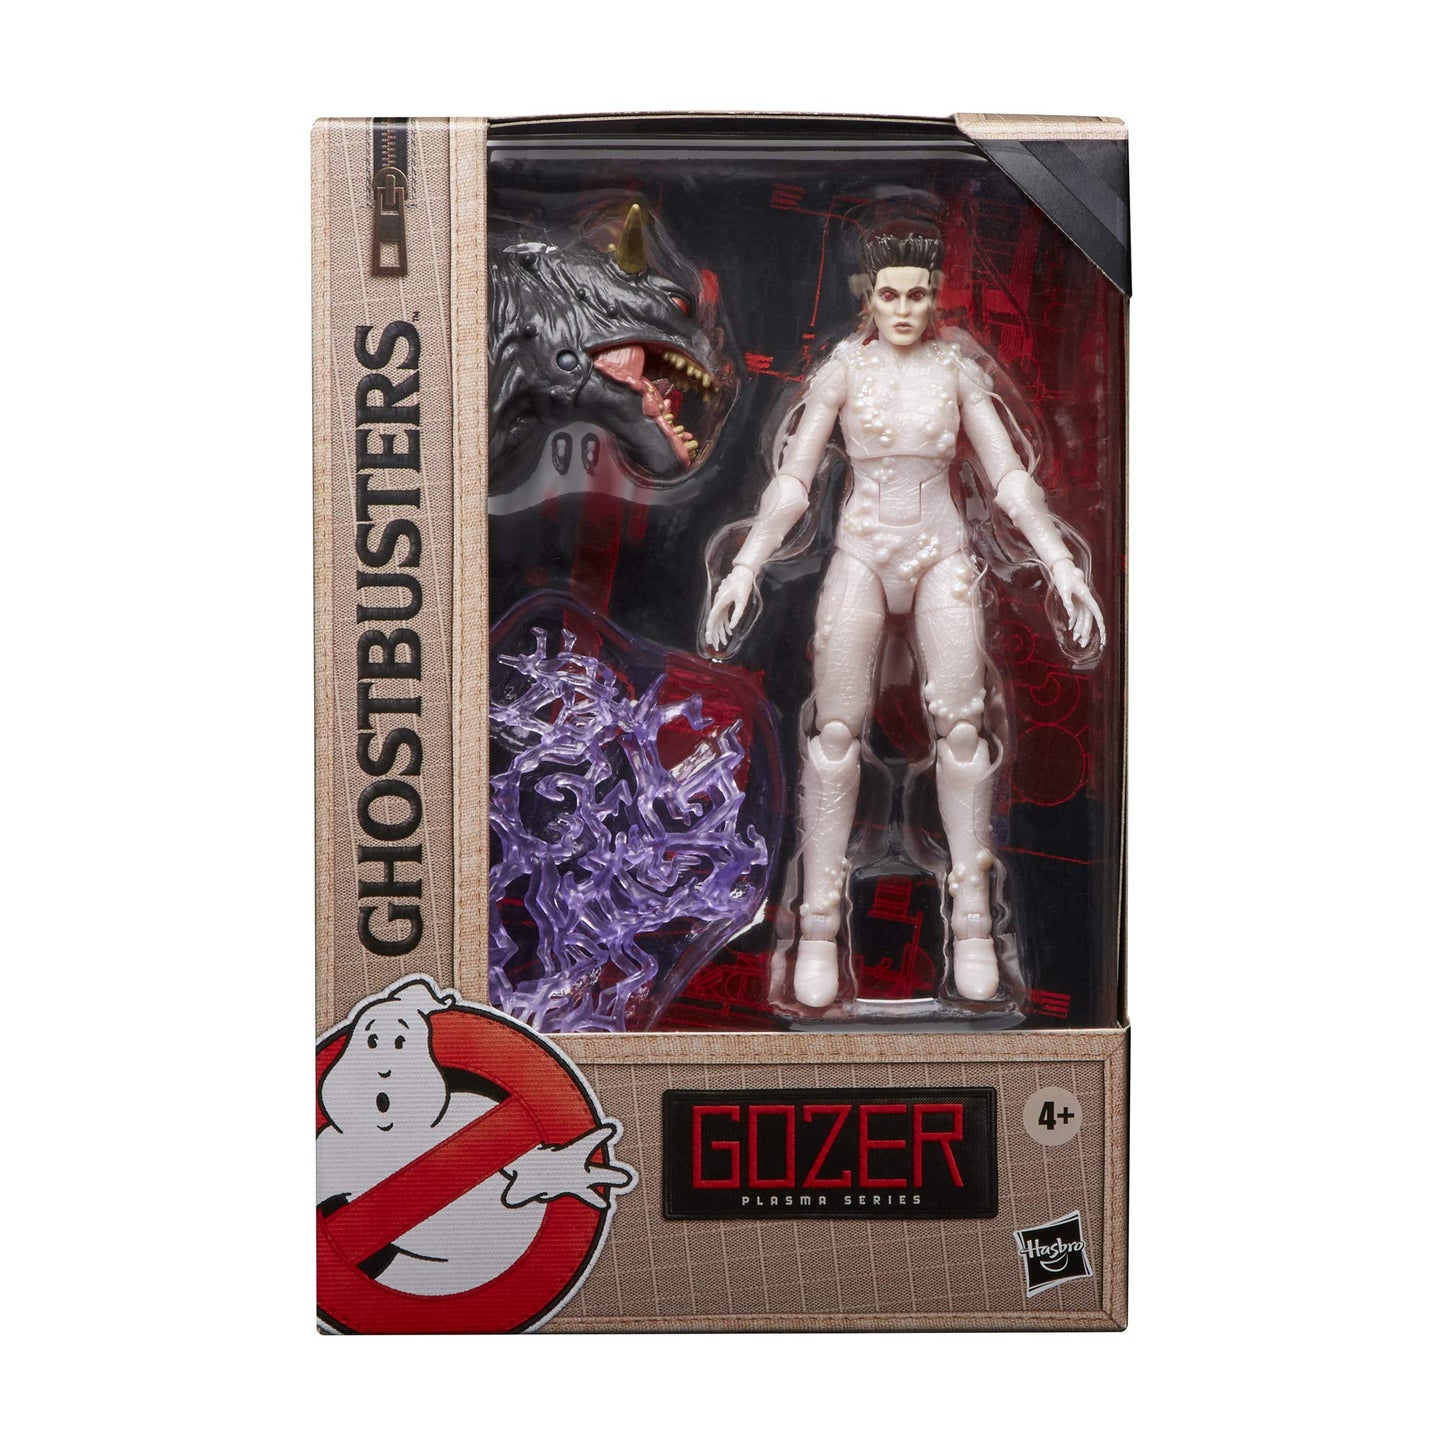 Ghostbusters Plasma Series Gozer Toy 6-Inch-Scale Collectible Classic 1984 Ghostbusters Action Figure, Toys for Kids Ages 4 and Up